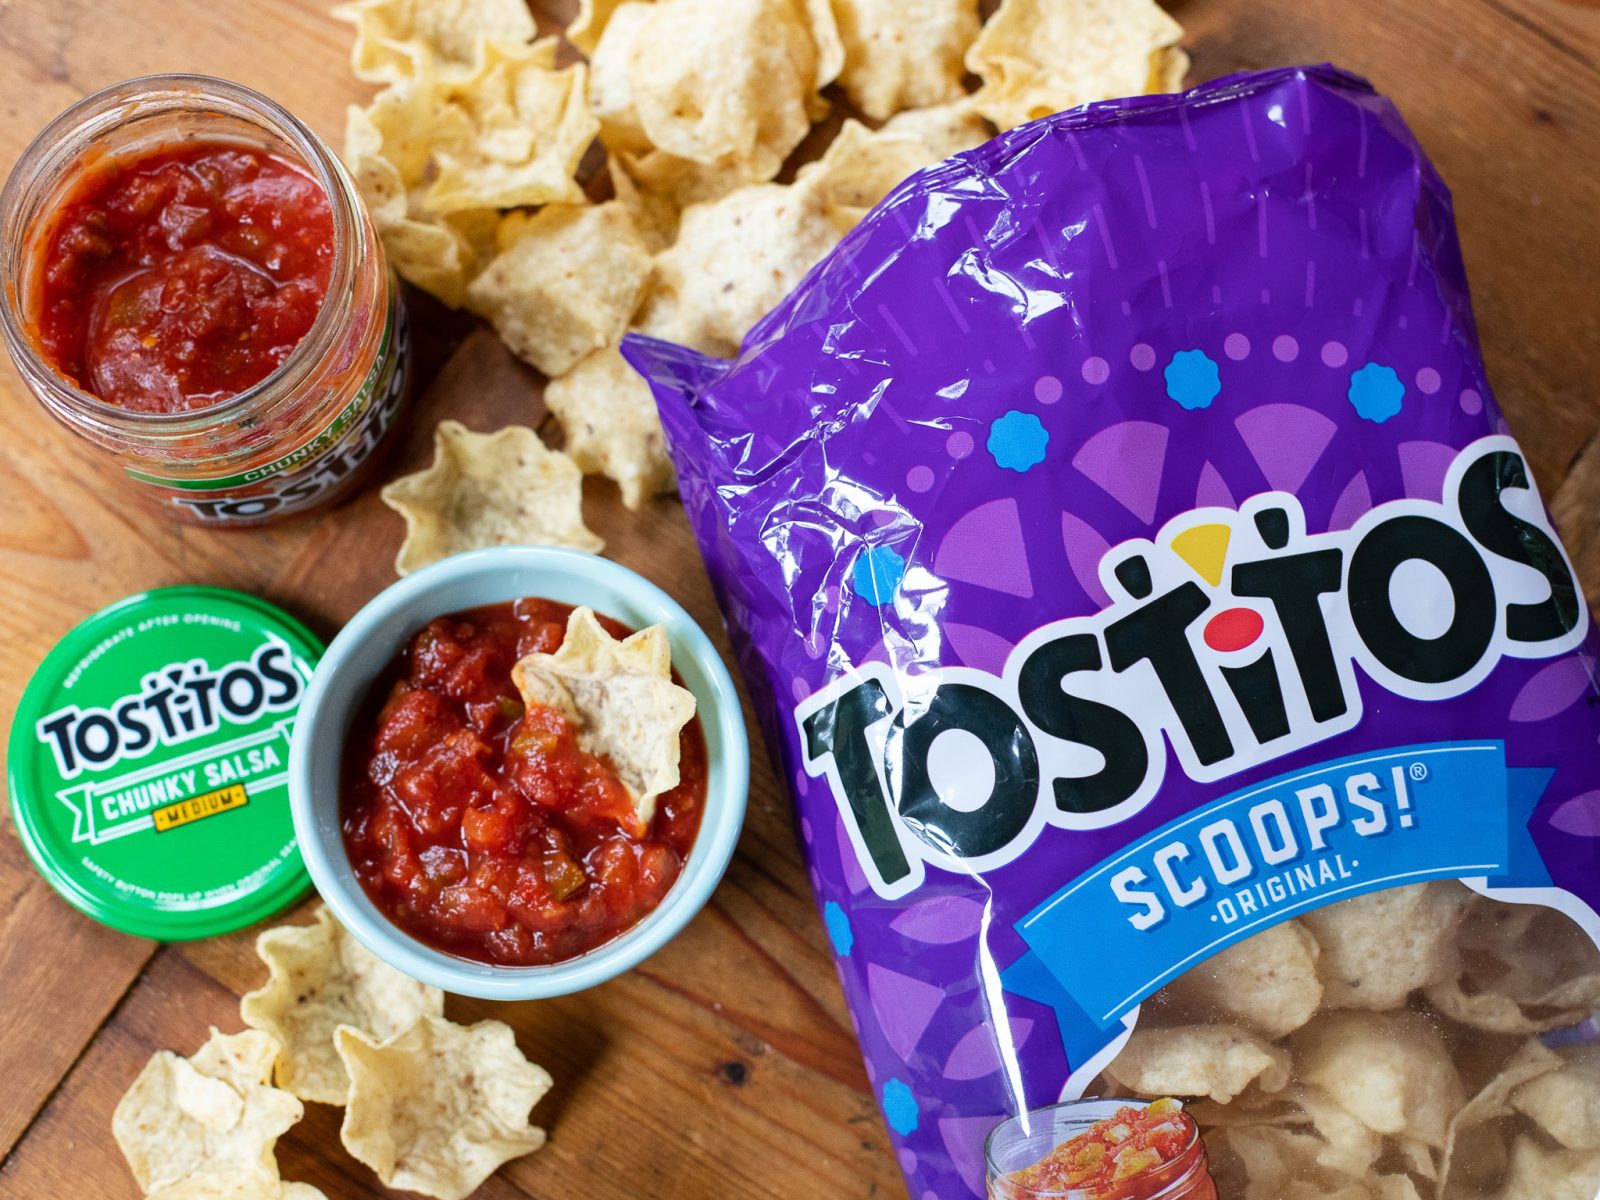 Grab Tostitos Chips As Low As $2.30 At Publix (Regular Price $5.59)